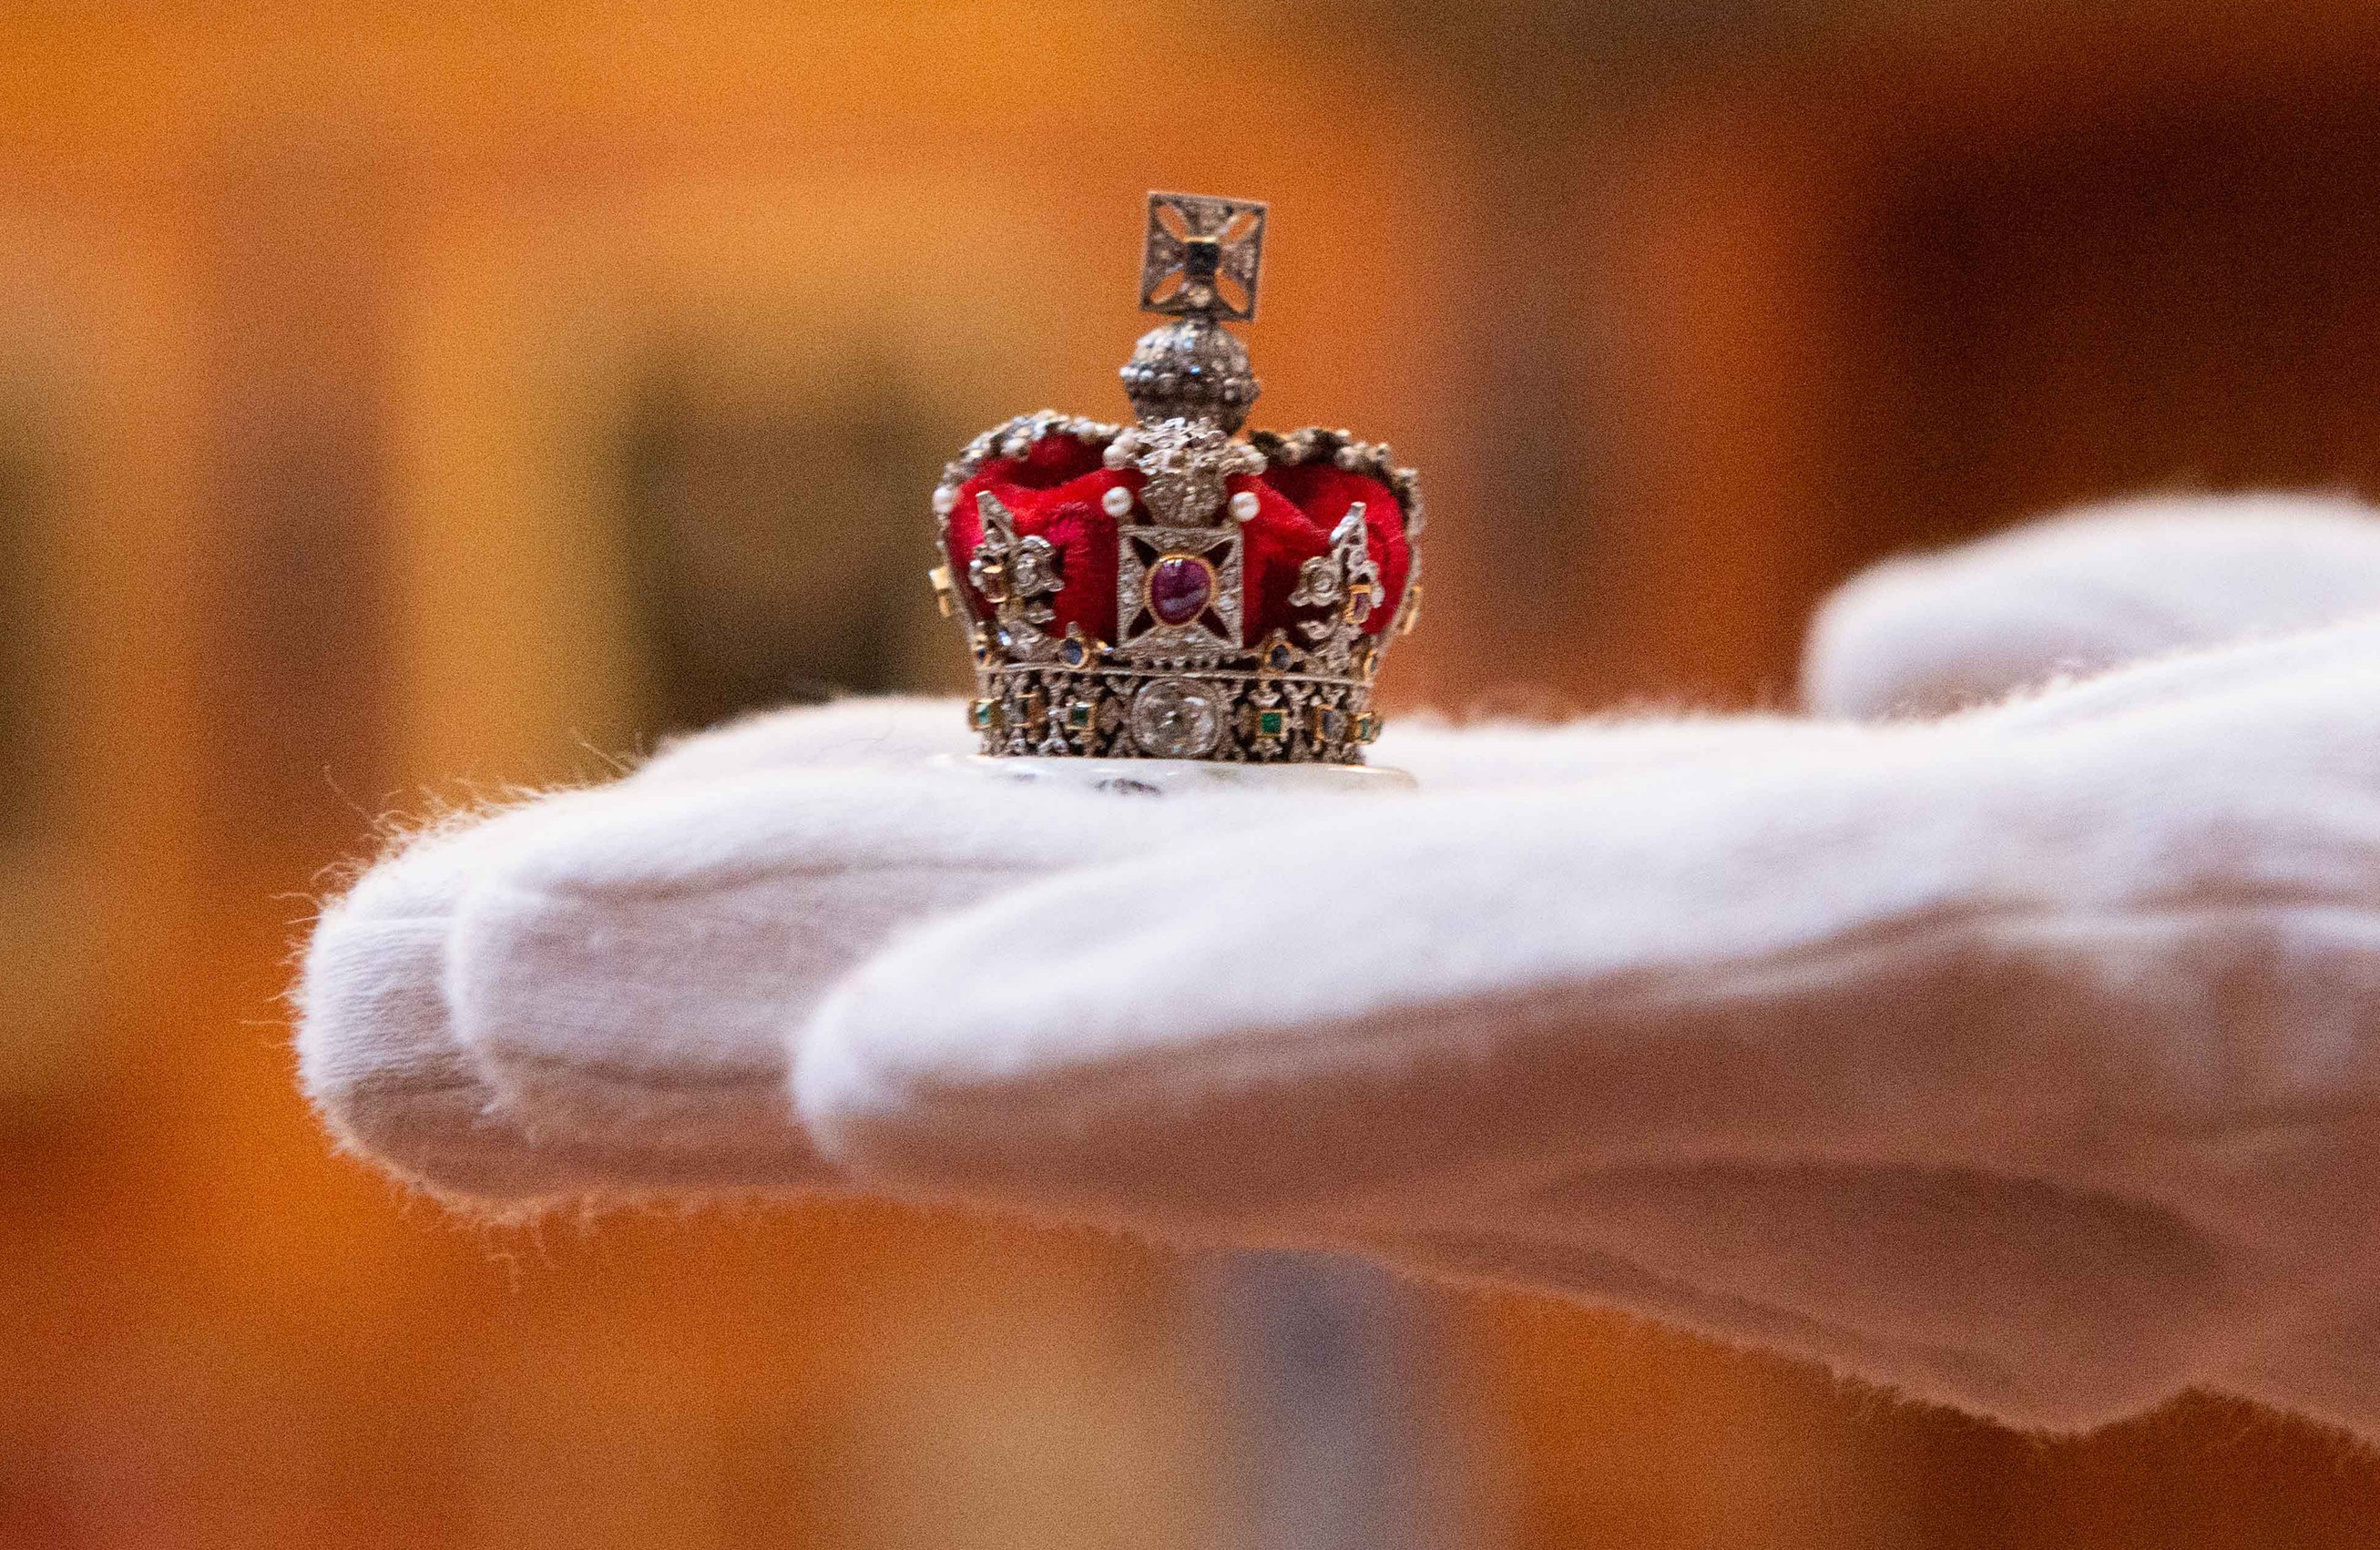 A tiny crown set with real gemstones